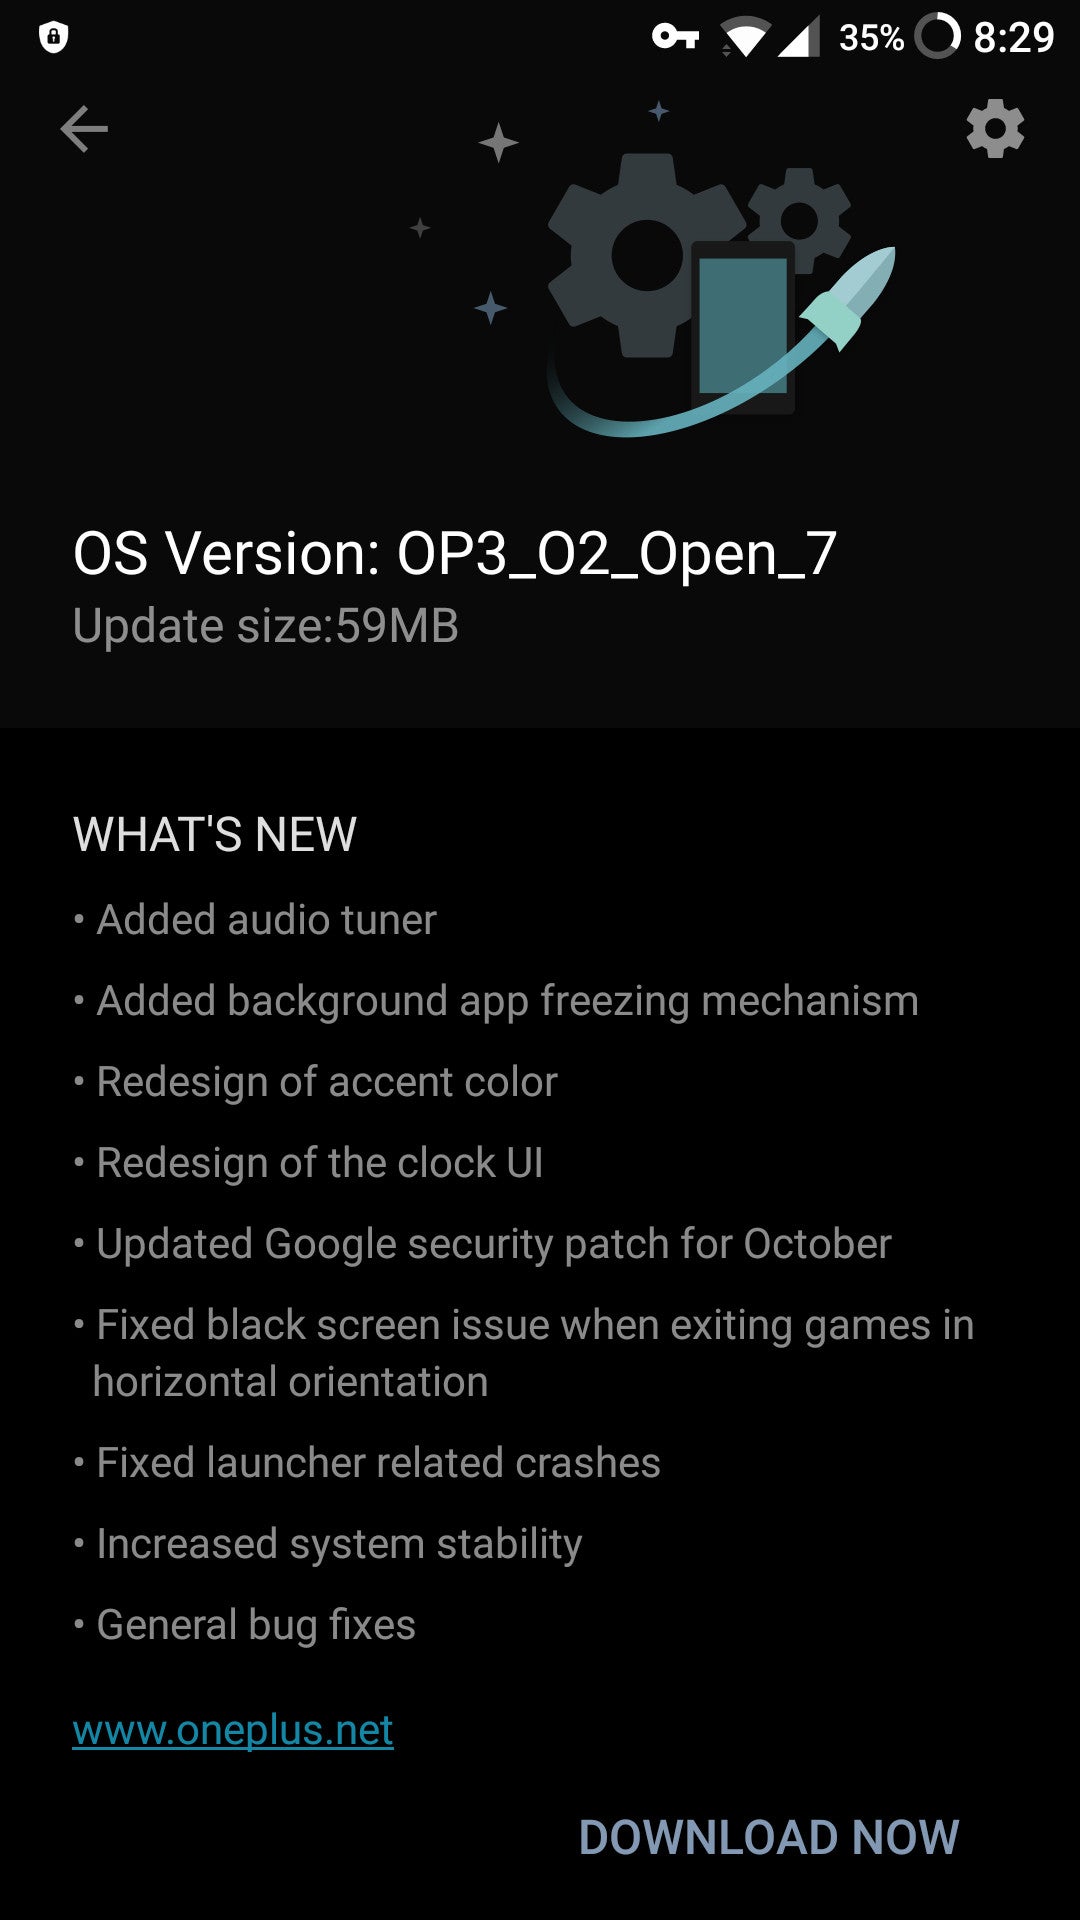 OnePlus 3 receives OxygenOS 3.5.5 Open Beta 7 update, it's not Android 7.0 Nougat